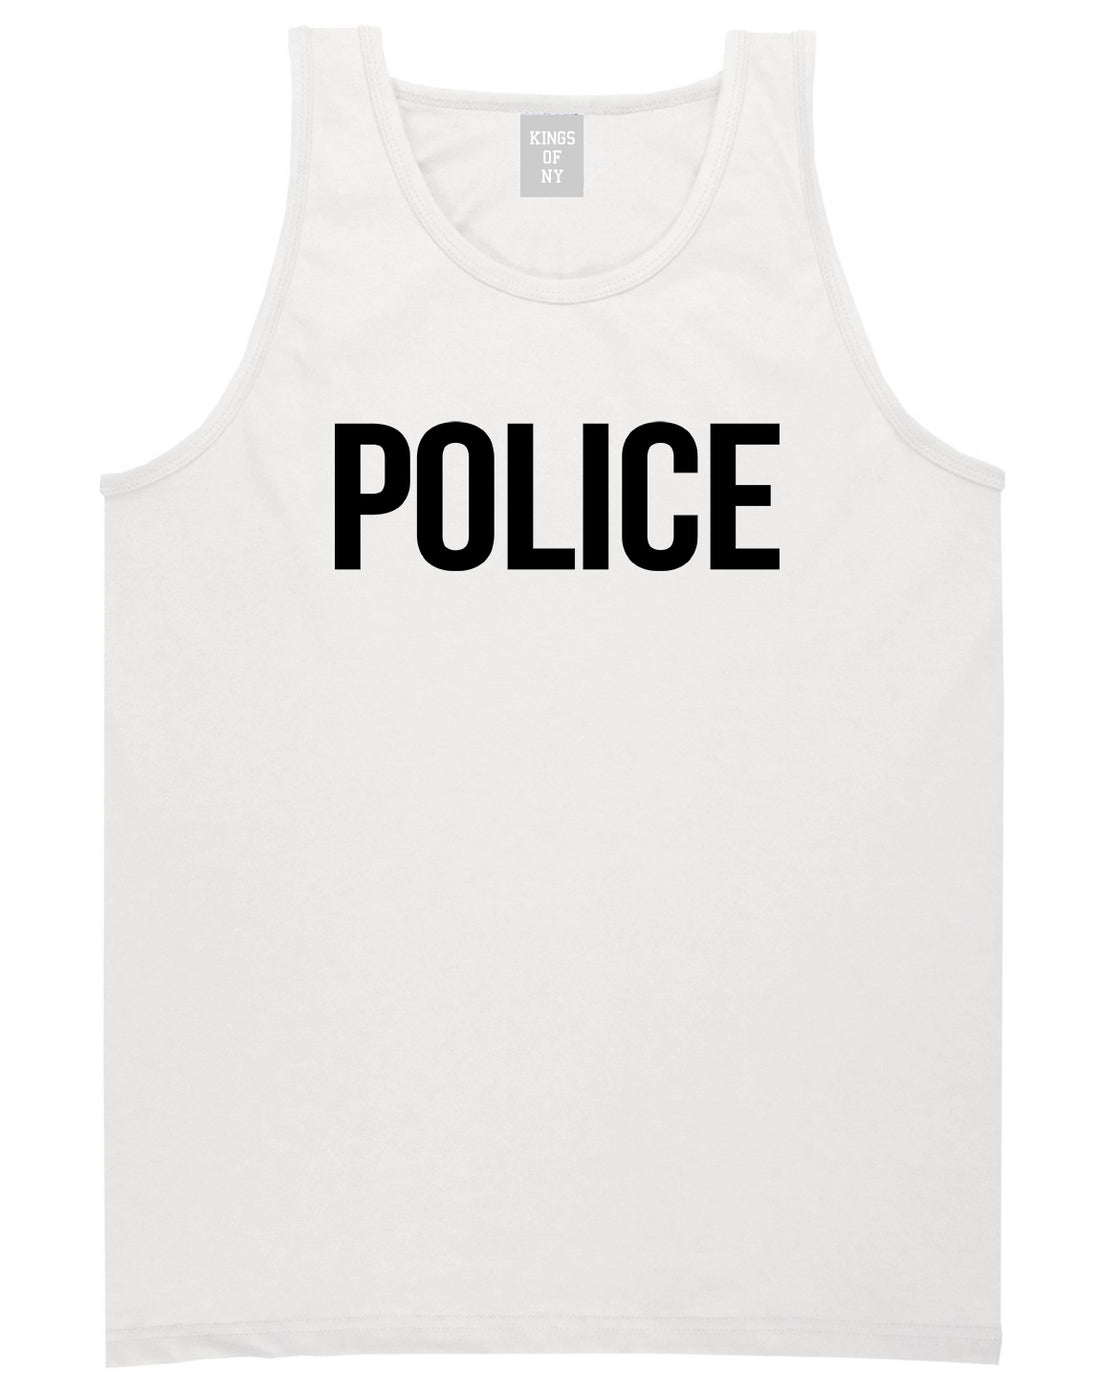 Police Uniform Cop Costume Mens Tank Top Shirt White by Kings Of NY